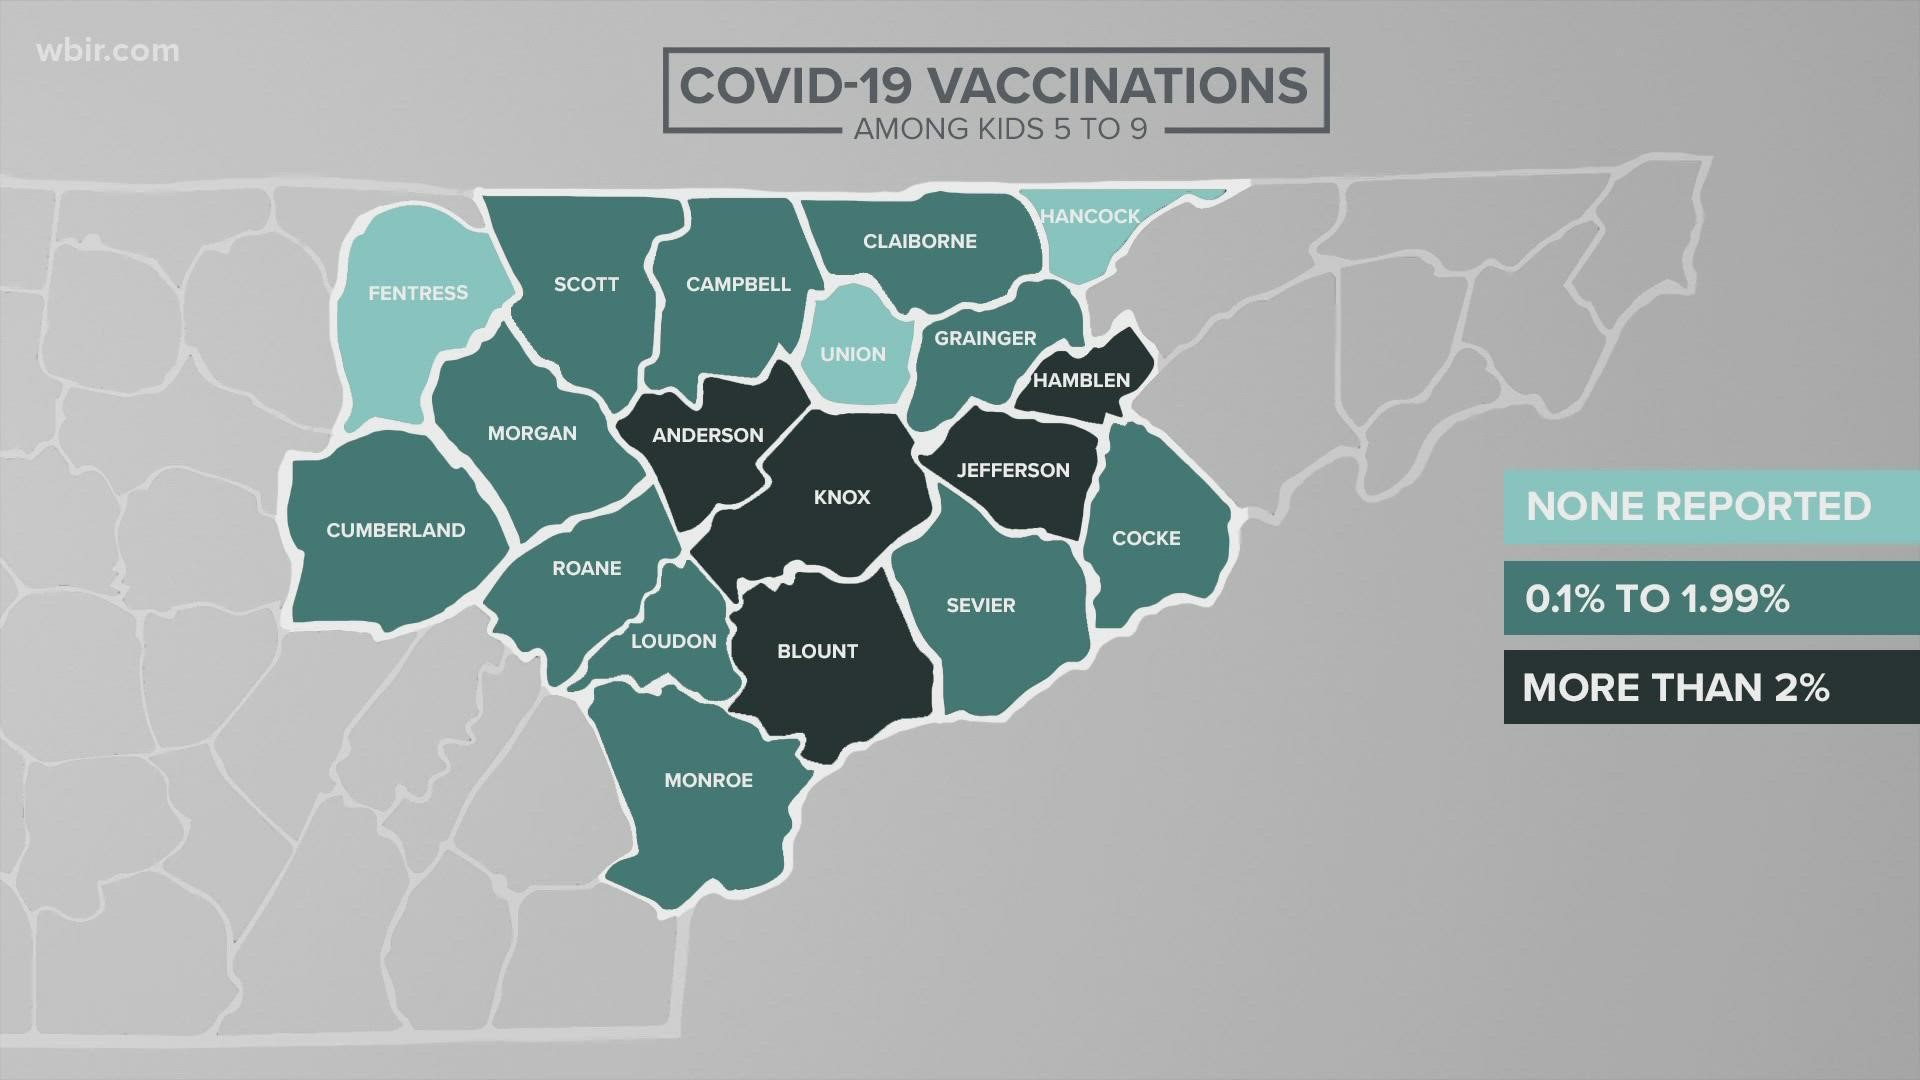 Fentress, Hancock, and Union counties have reported no vaccinations of kids 5 to 9 as of Nov. 16.